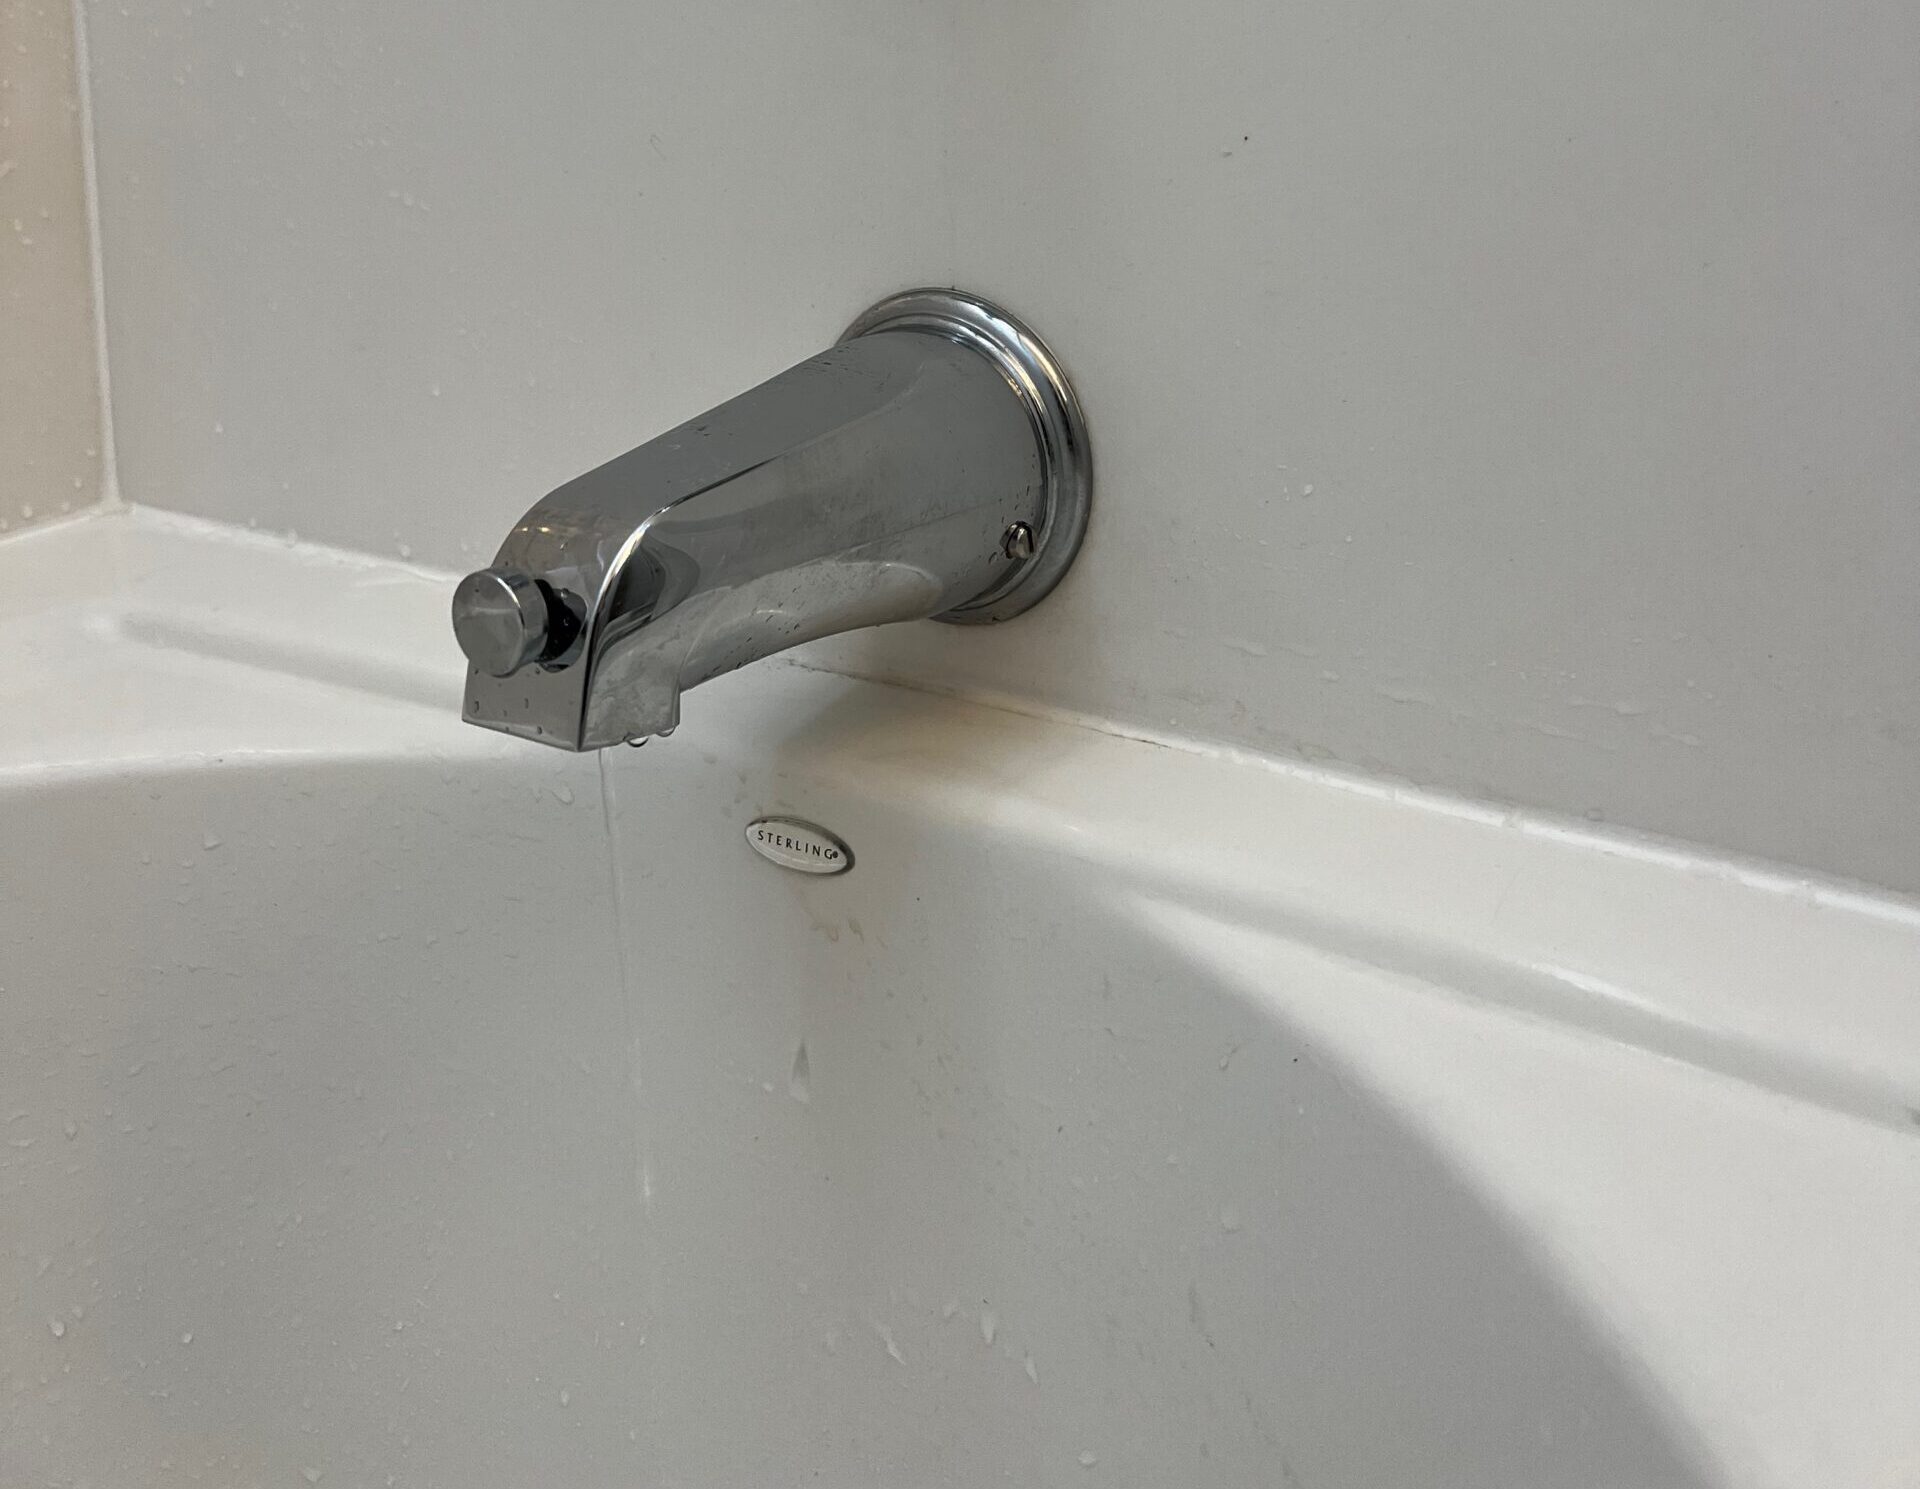 Tackling Tub Spout Dilemmas: The Diverter Issue